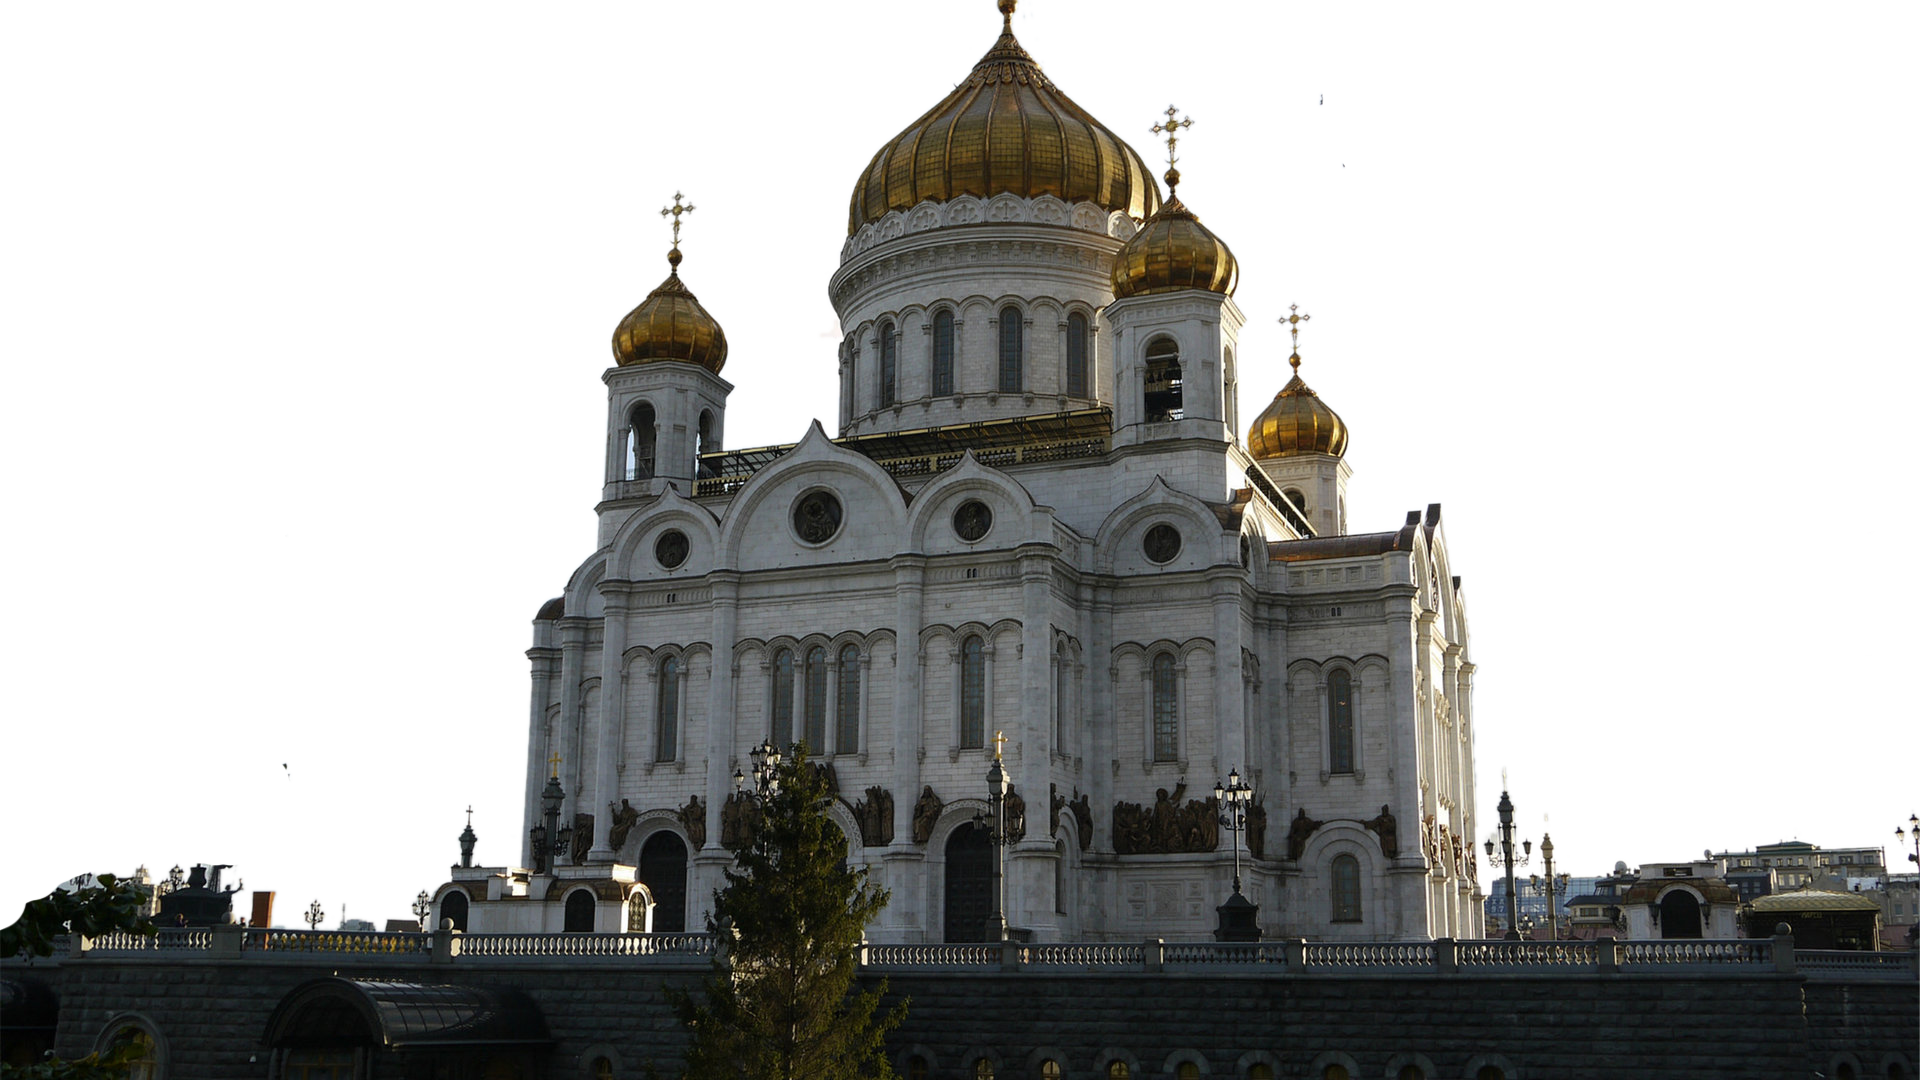 White Stone Dormition Cathederal - Russia PNG Image